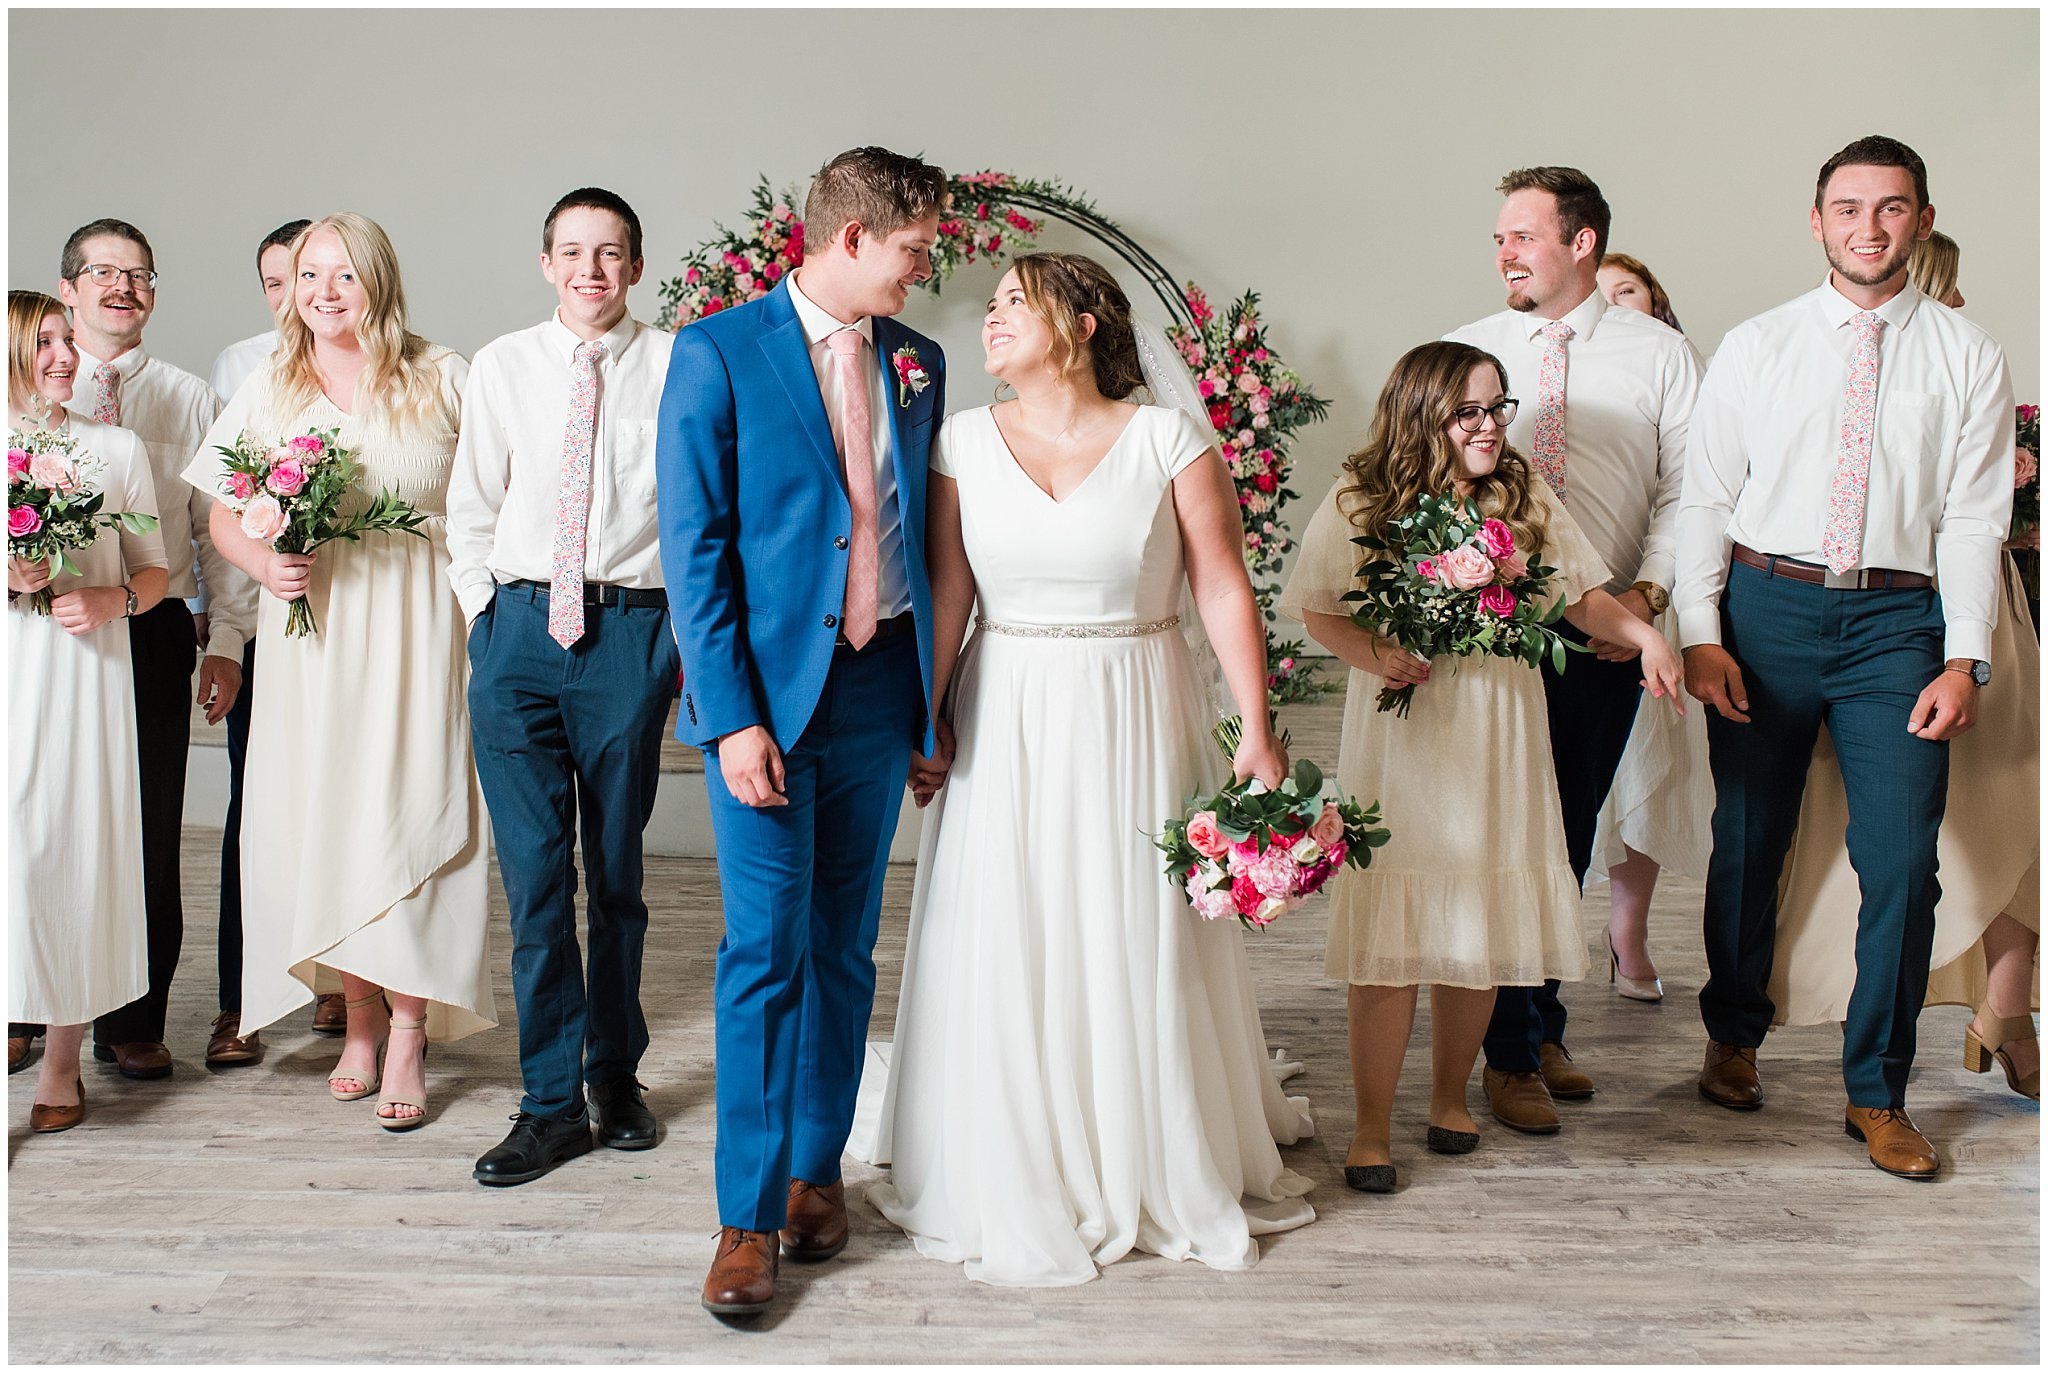 Wedding party wearing floral ties and cream colored dresses in front of floral arch in shades of pink | Talia Event Center Summer Wedding | Jessie and Dallin Photography